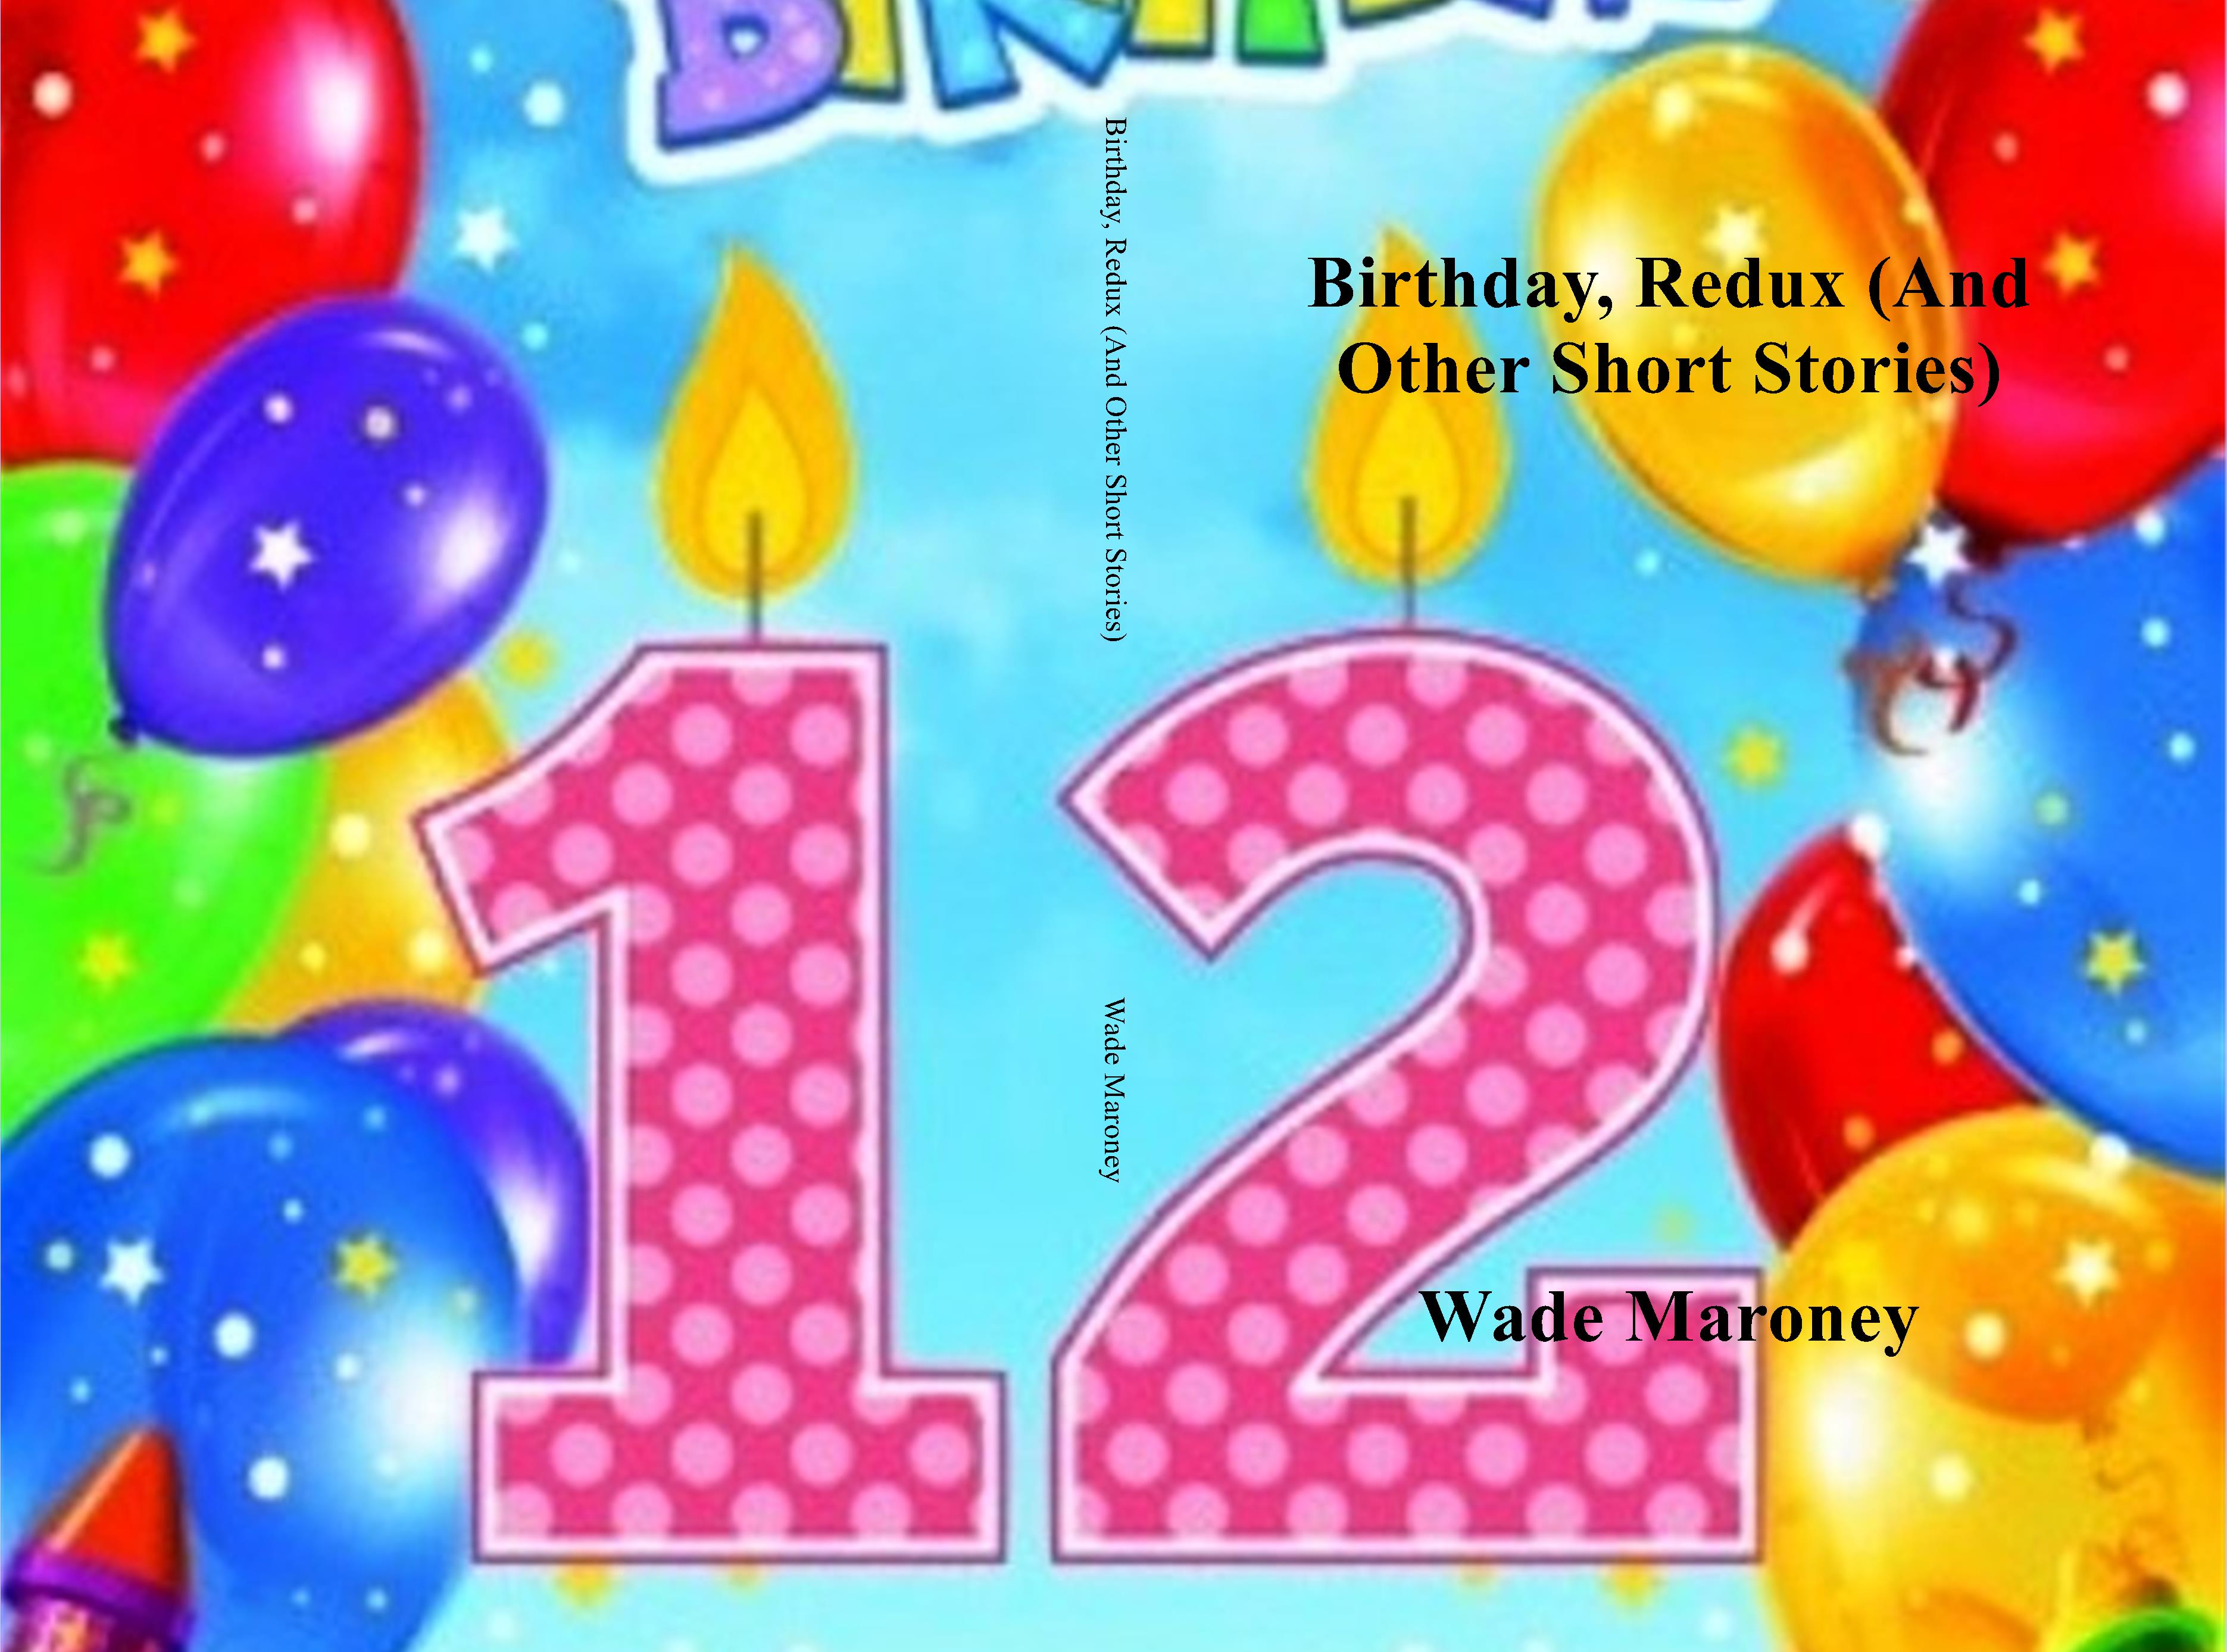 Birthday, Redux (And Other Short Stories) cover image